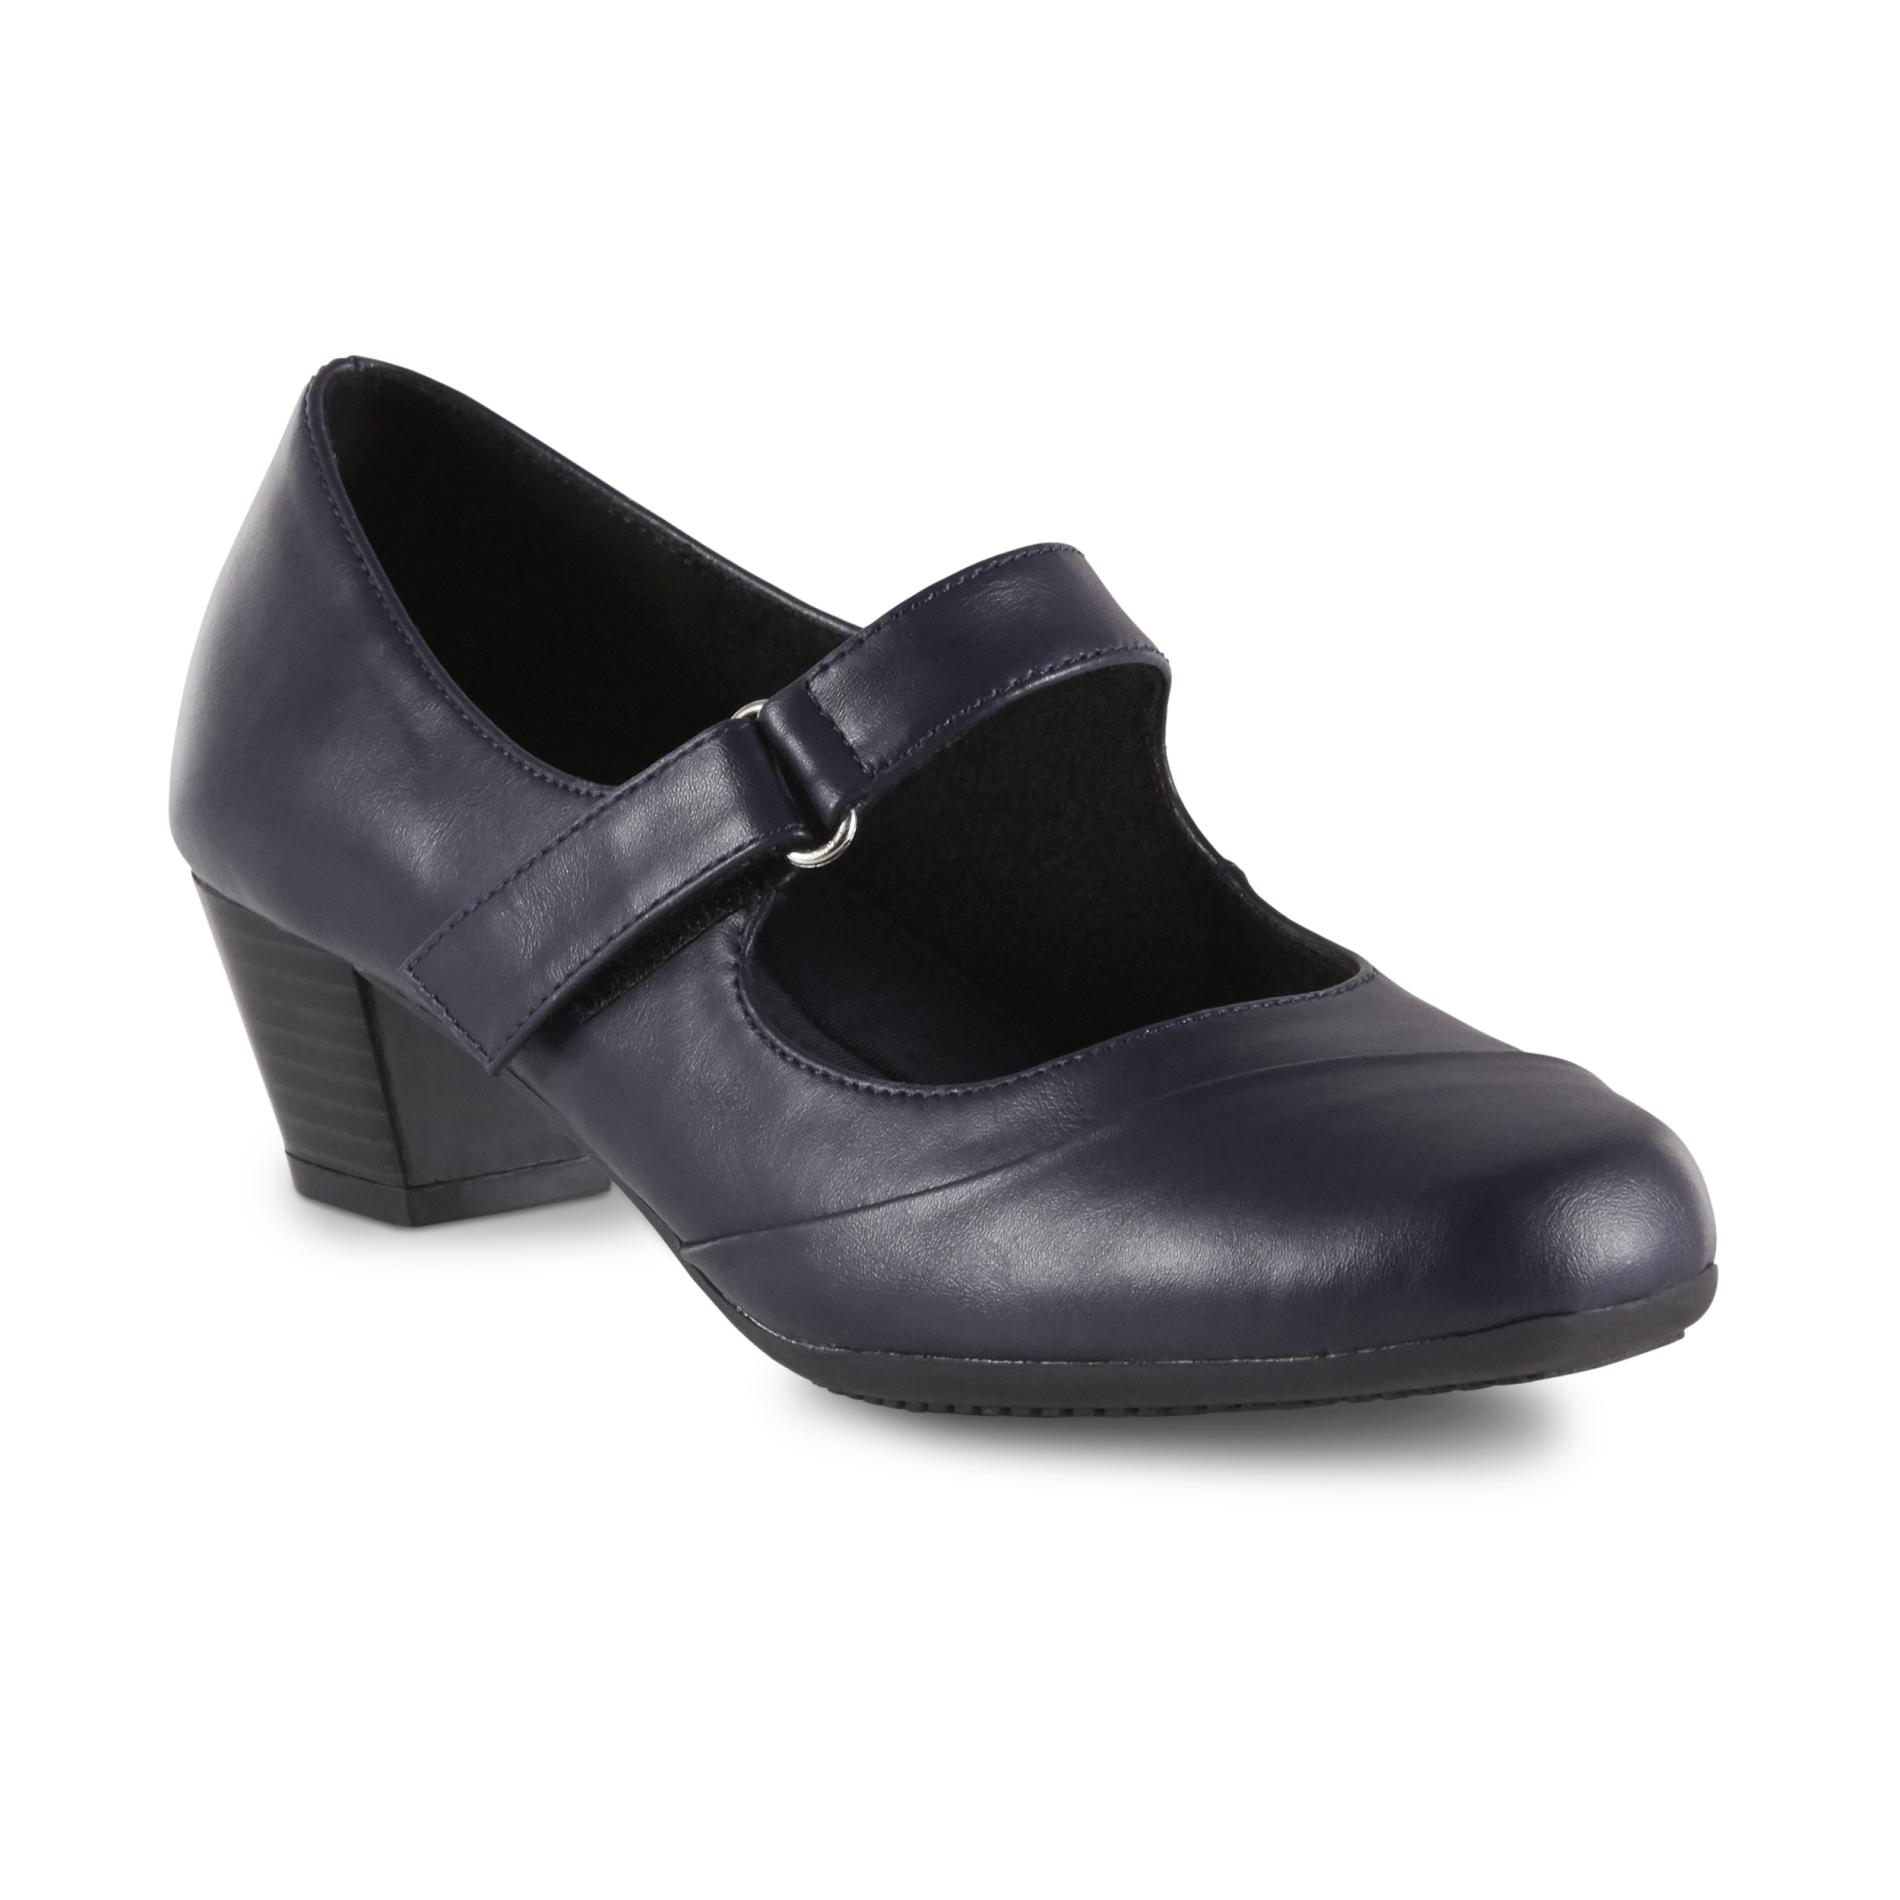 black low heel mary jane shoes